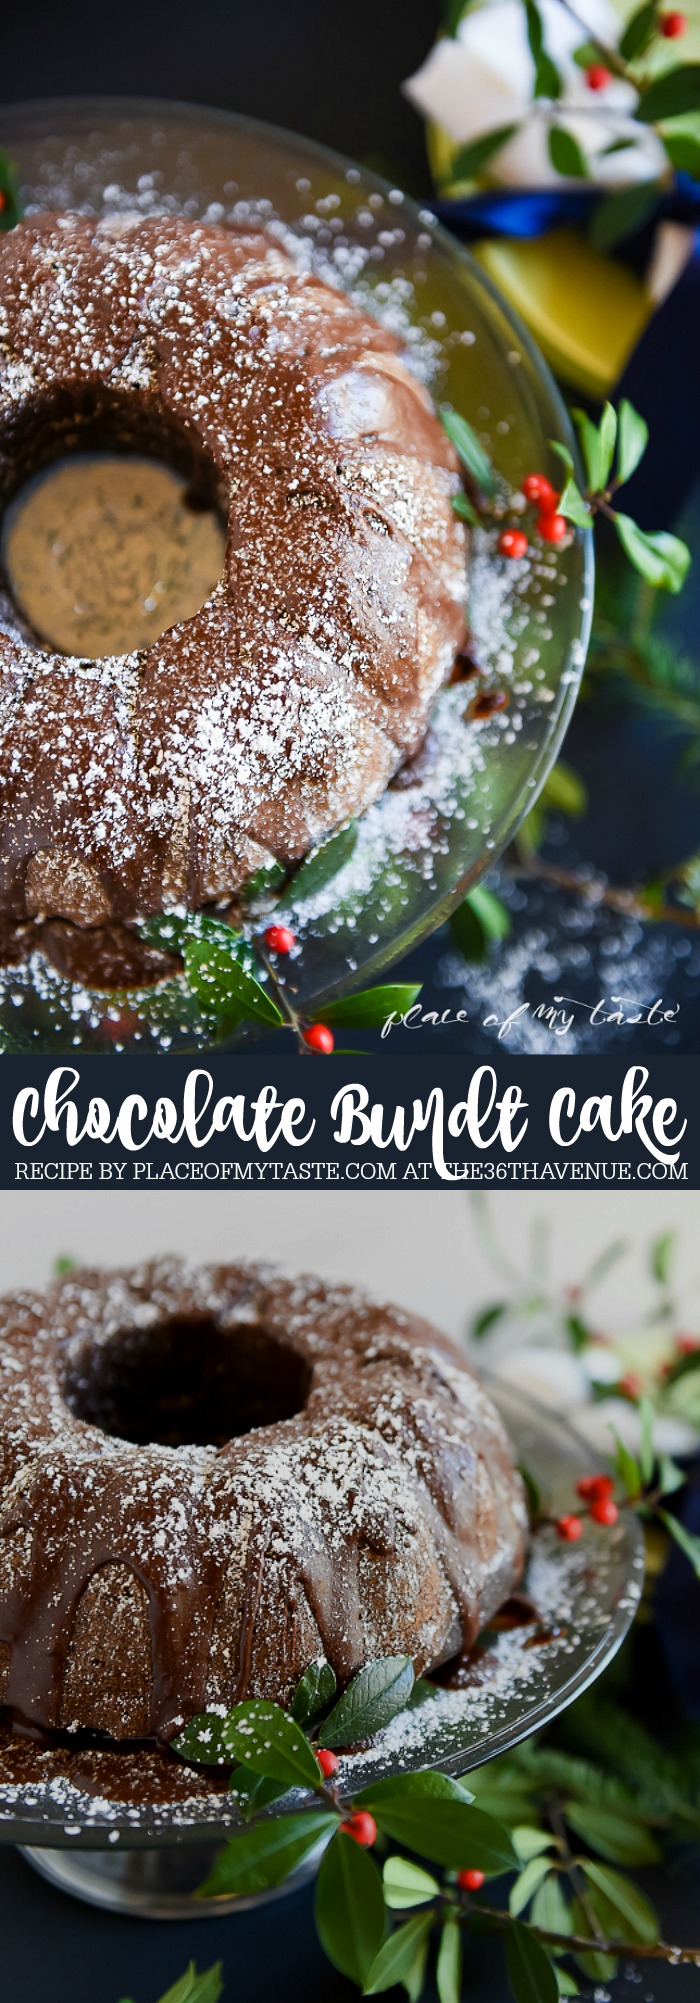 Chocolate Bundt Cake Recipe - This delicious chocolate cake is not too sweet, it's very chocolatey, and super soft and fluffy.  You can put the ingredients together in less than 10 minutes. No joke!  Bake it for 45 minutes and this incredible goodness is done! PIN IT NOW and bake it later!